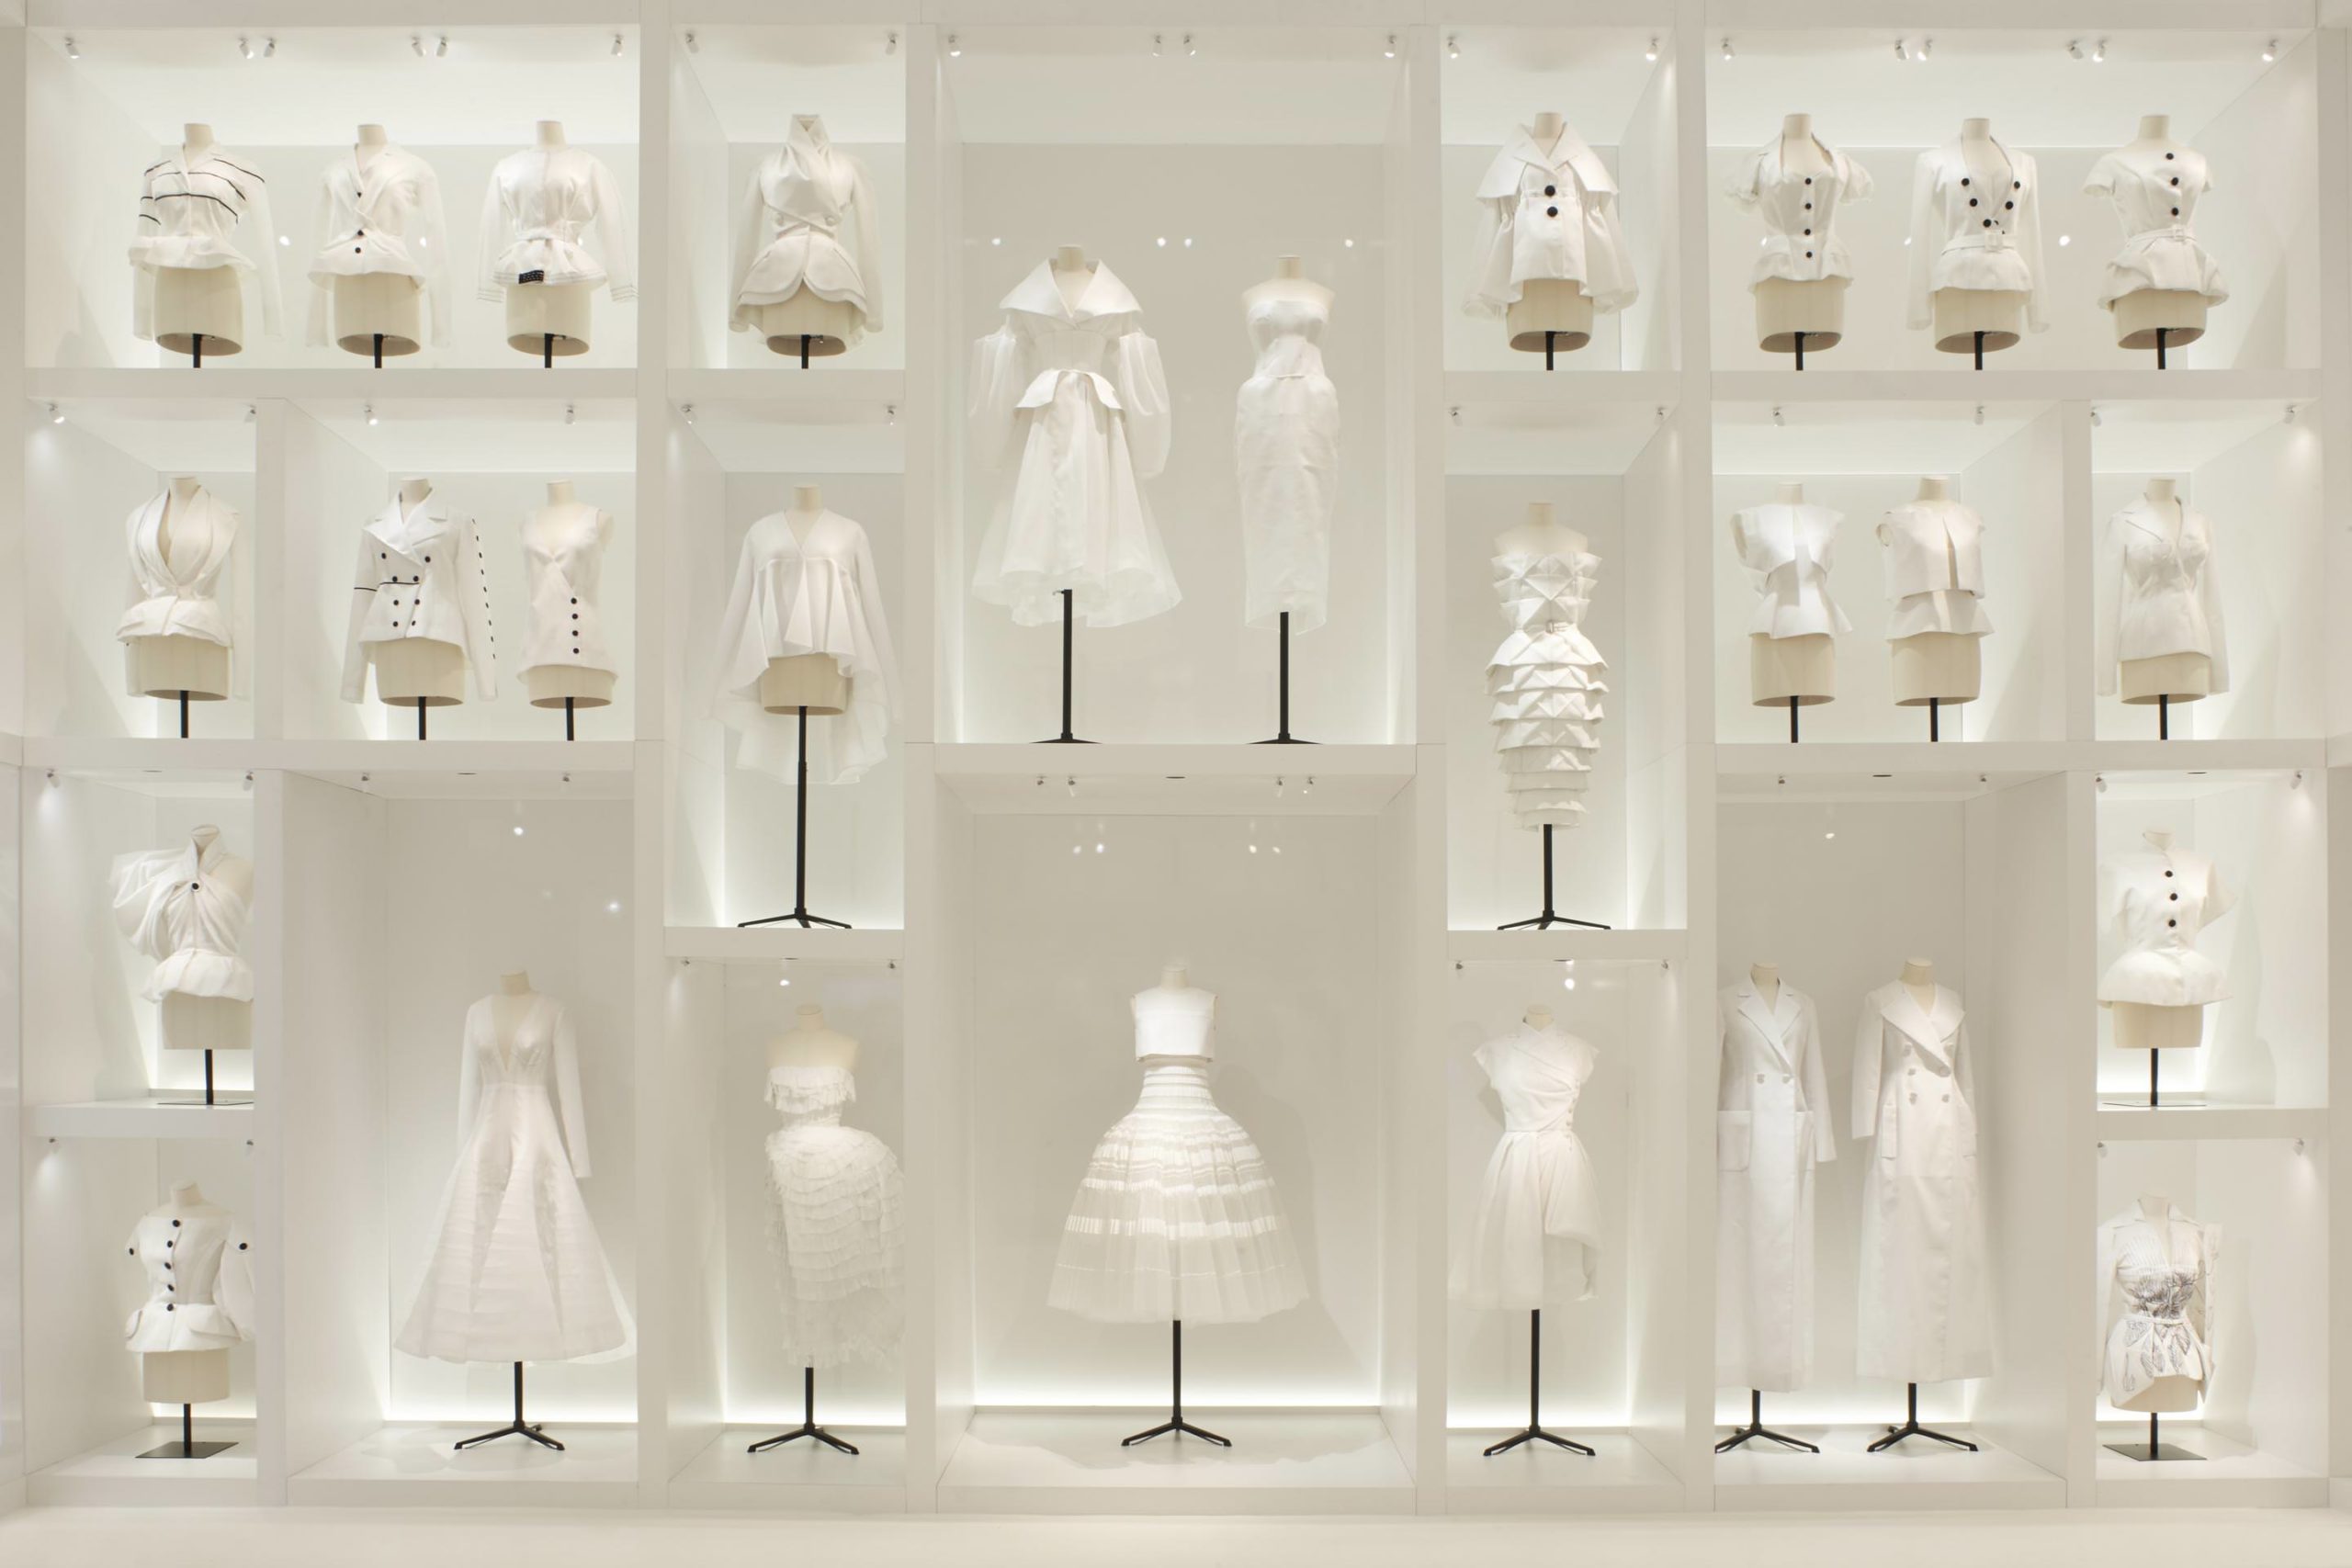 From Paris to the World: Dior's Retrospective Touches Down in